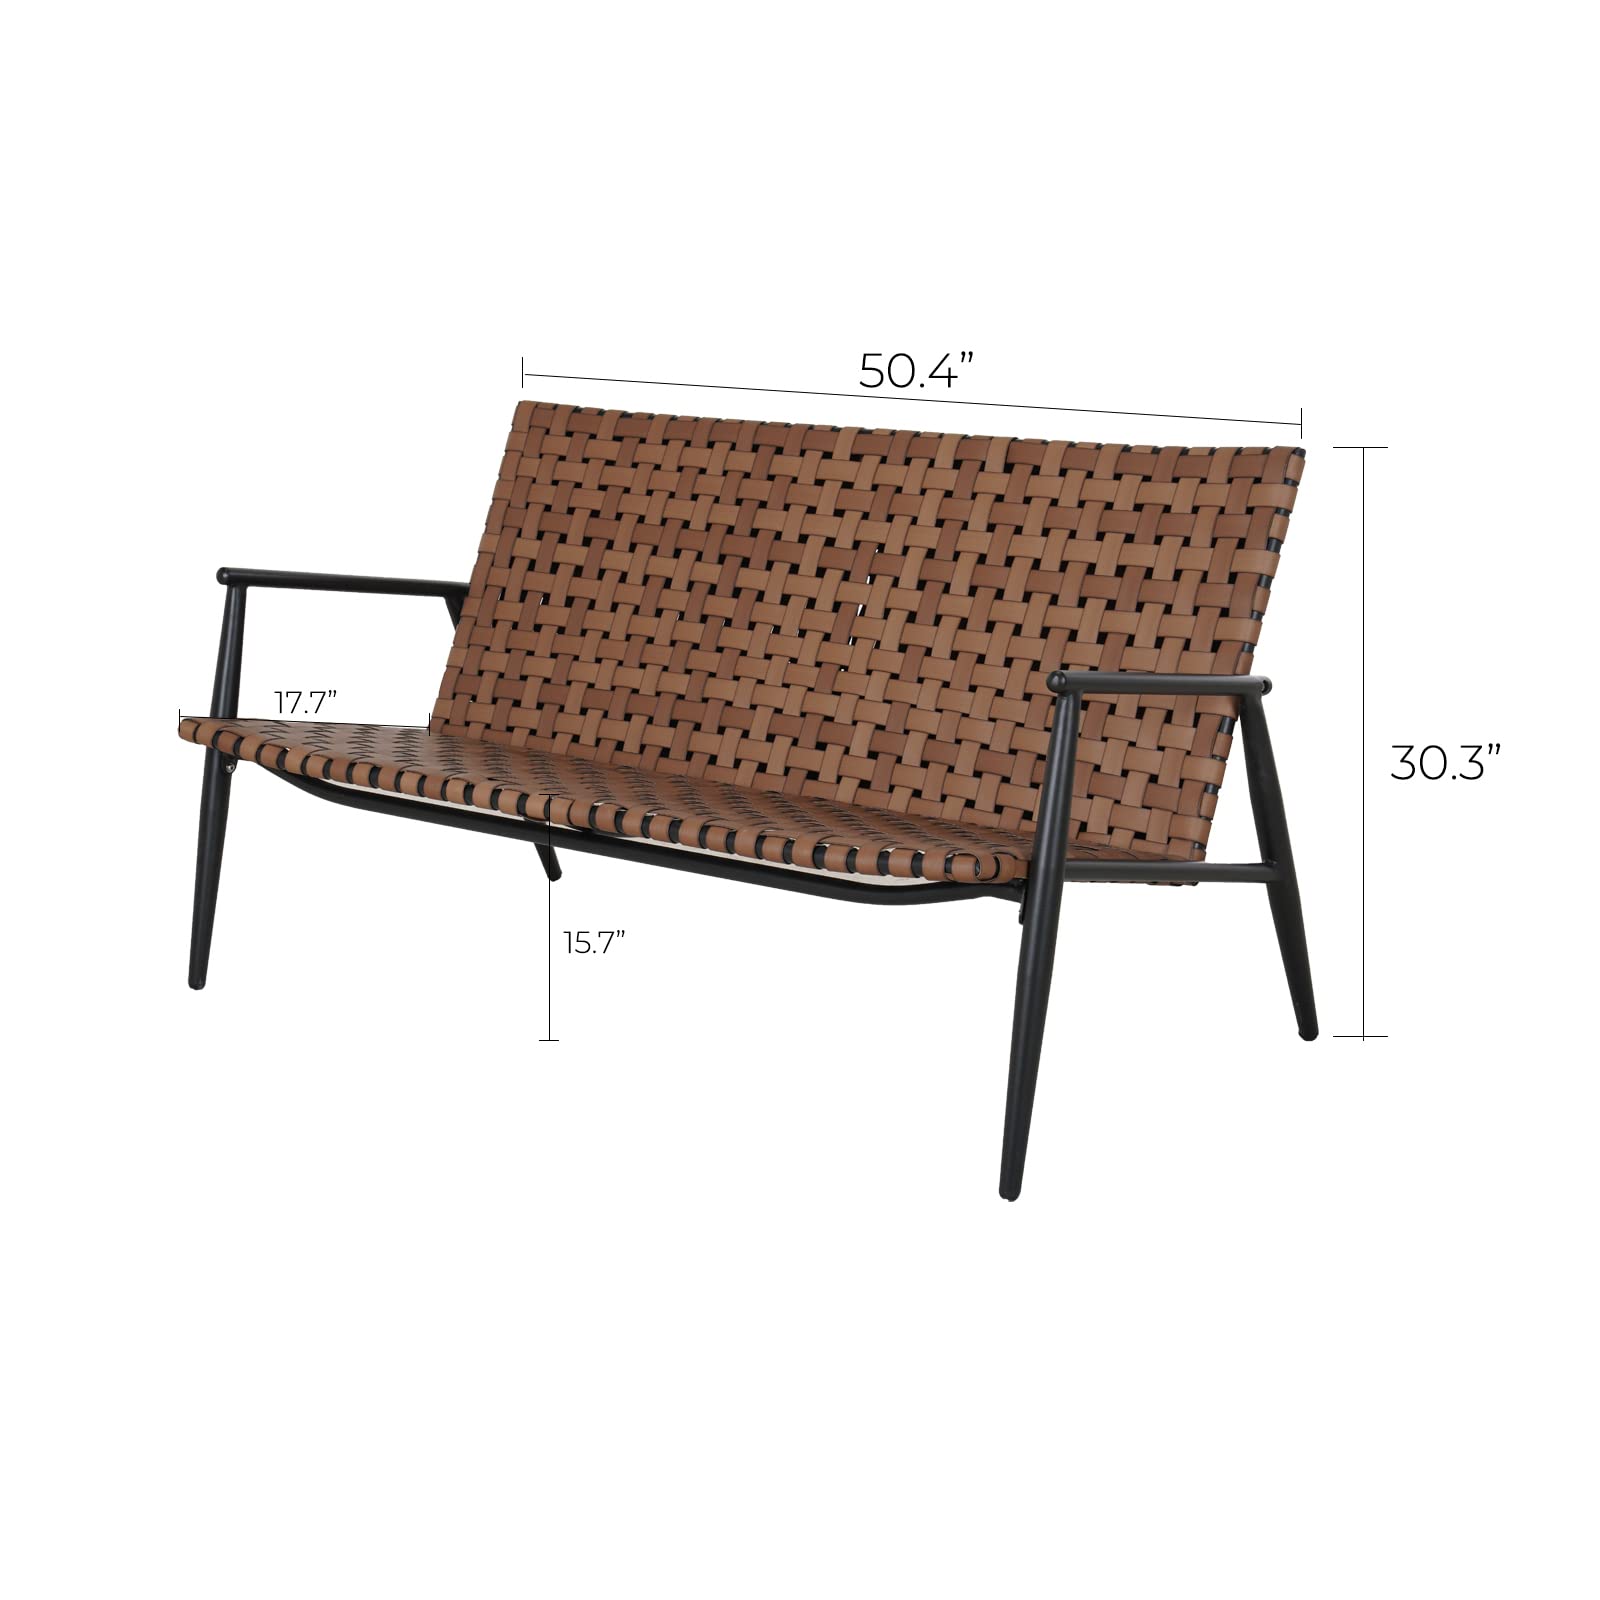 Outdoor/Indoor Aksel Series Conversation Loveseat, All Weather Leather-Look Wicker Outdoor Powder Coated Aluminum Frame 2-Seat Sofa